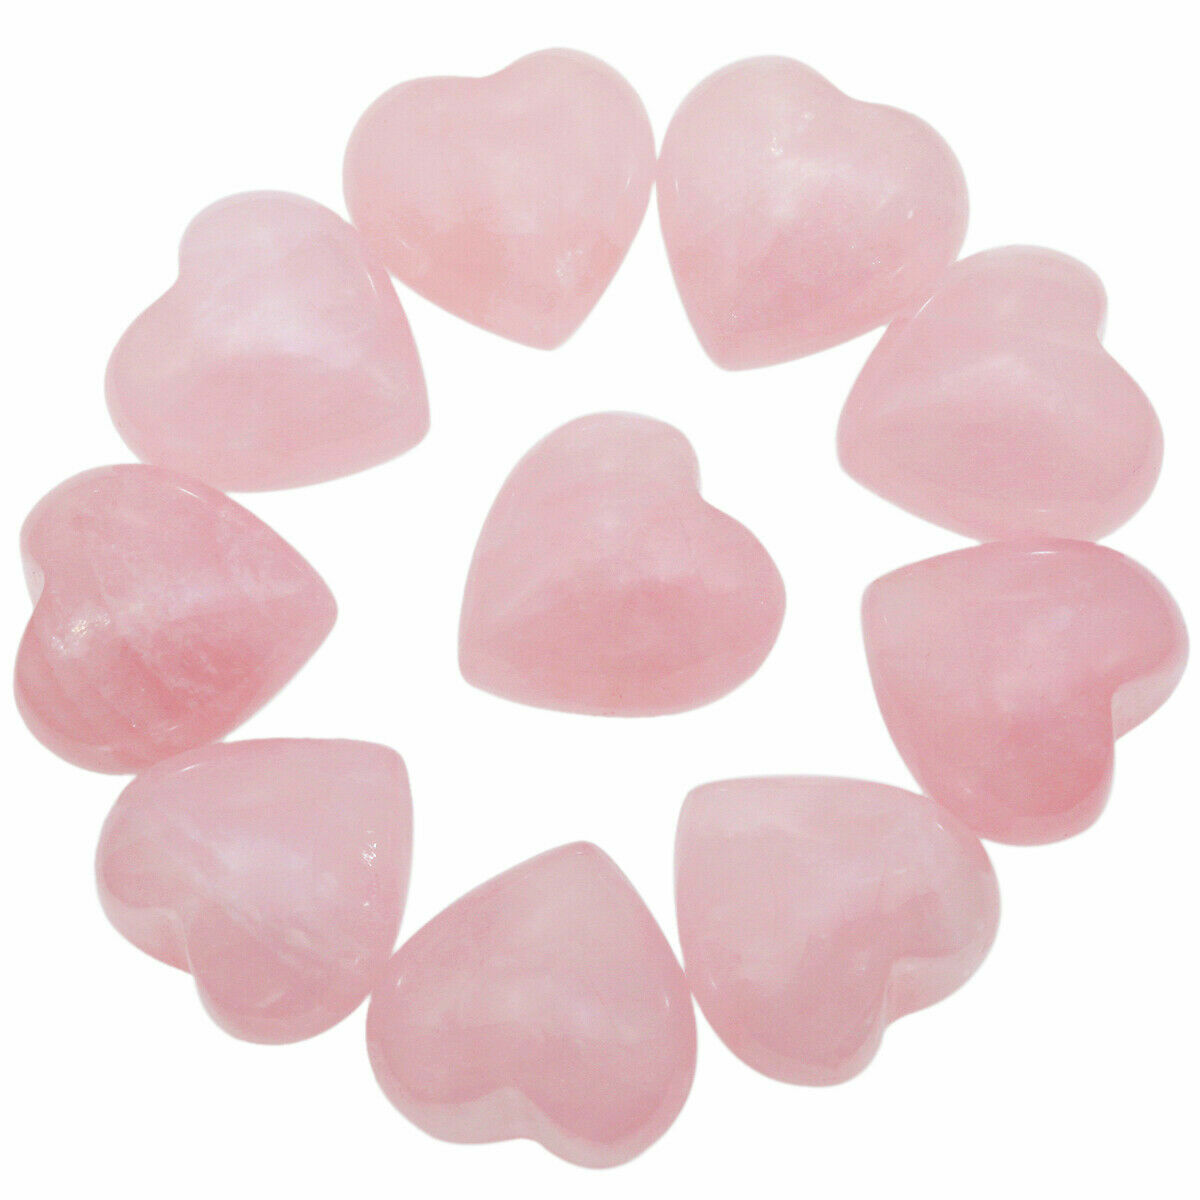 10Pcs Natural Rose Quartz Pocket Palm Worry Stones Puff Heart Healing Crystal Unbranded Does not apply